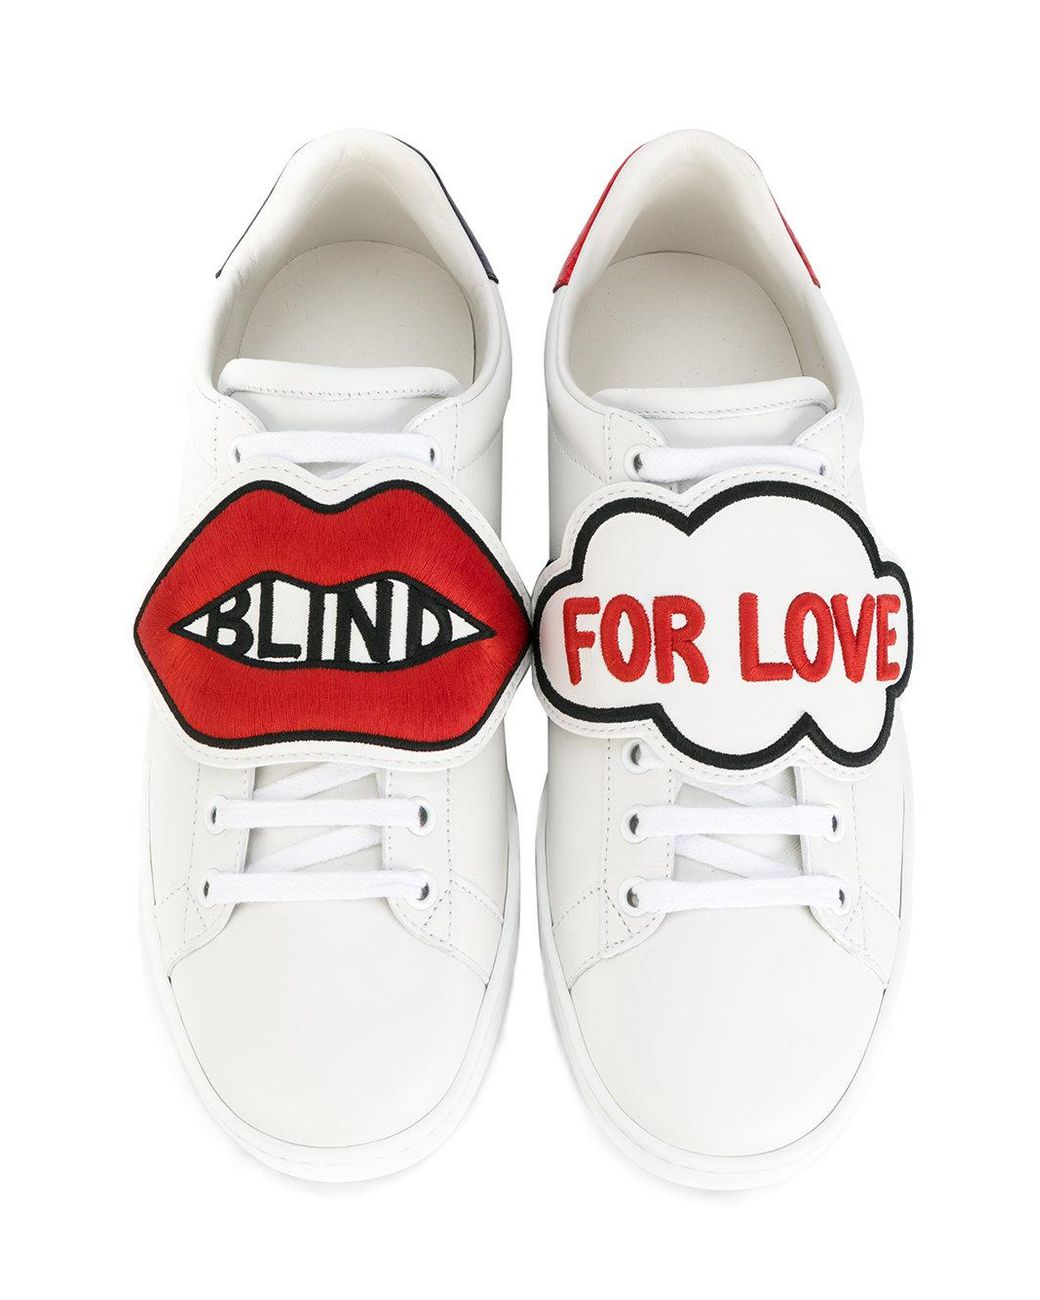 Gucci Blind For Love Ace Patch Sneakers in White | Lyst Australia